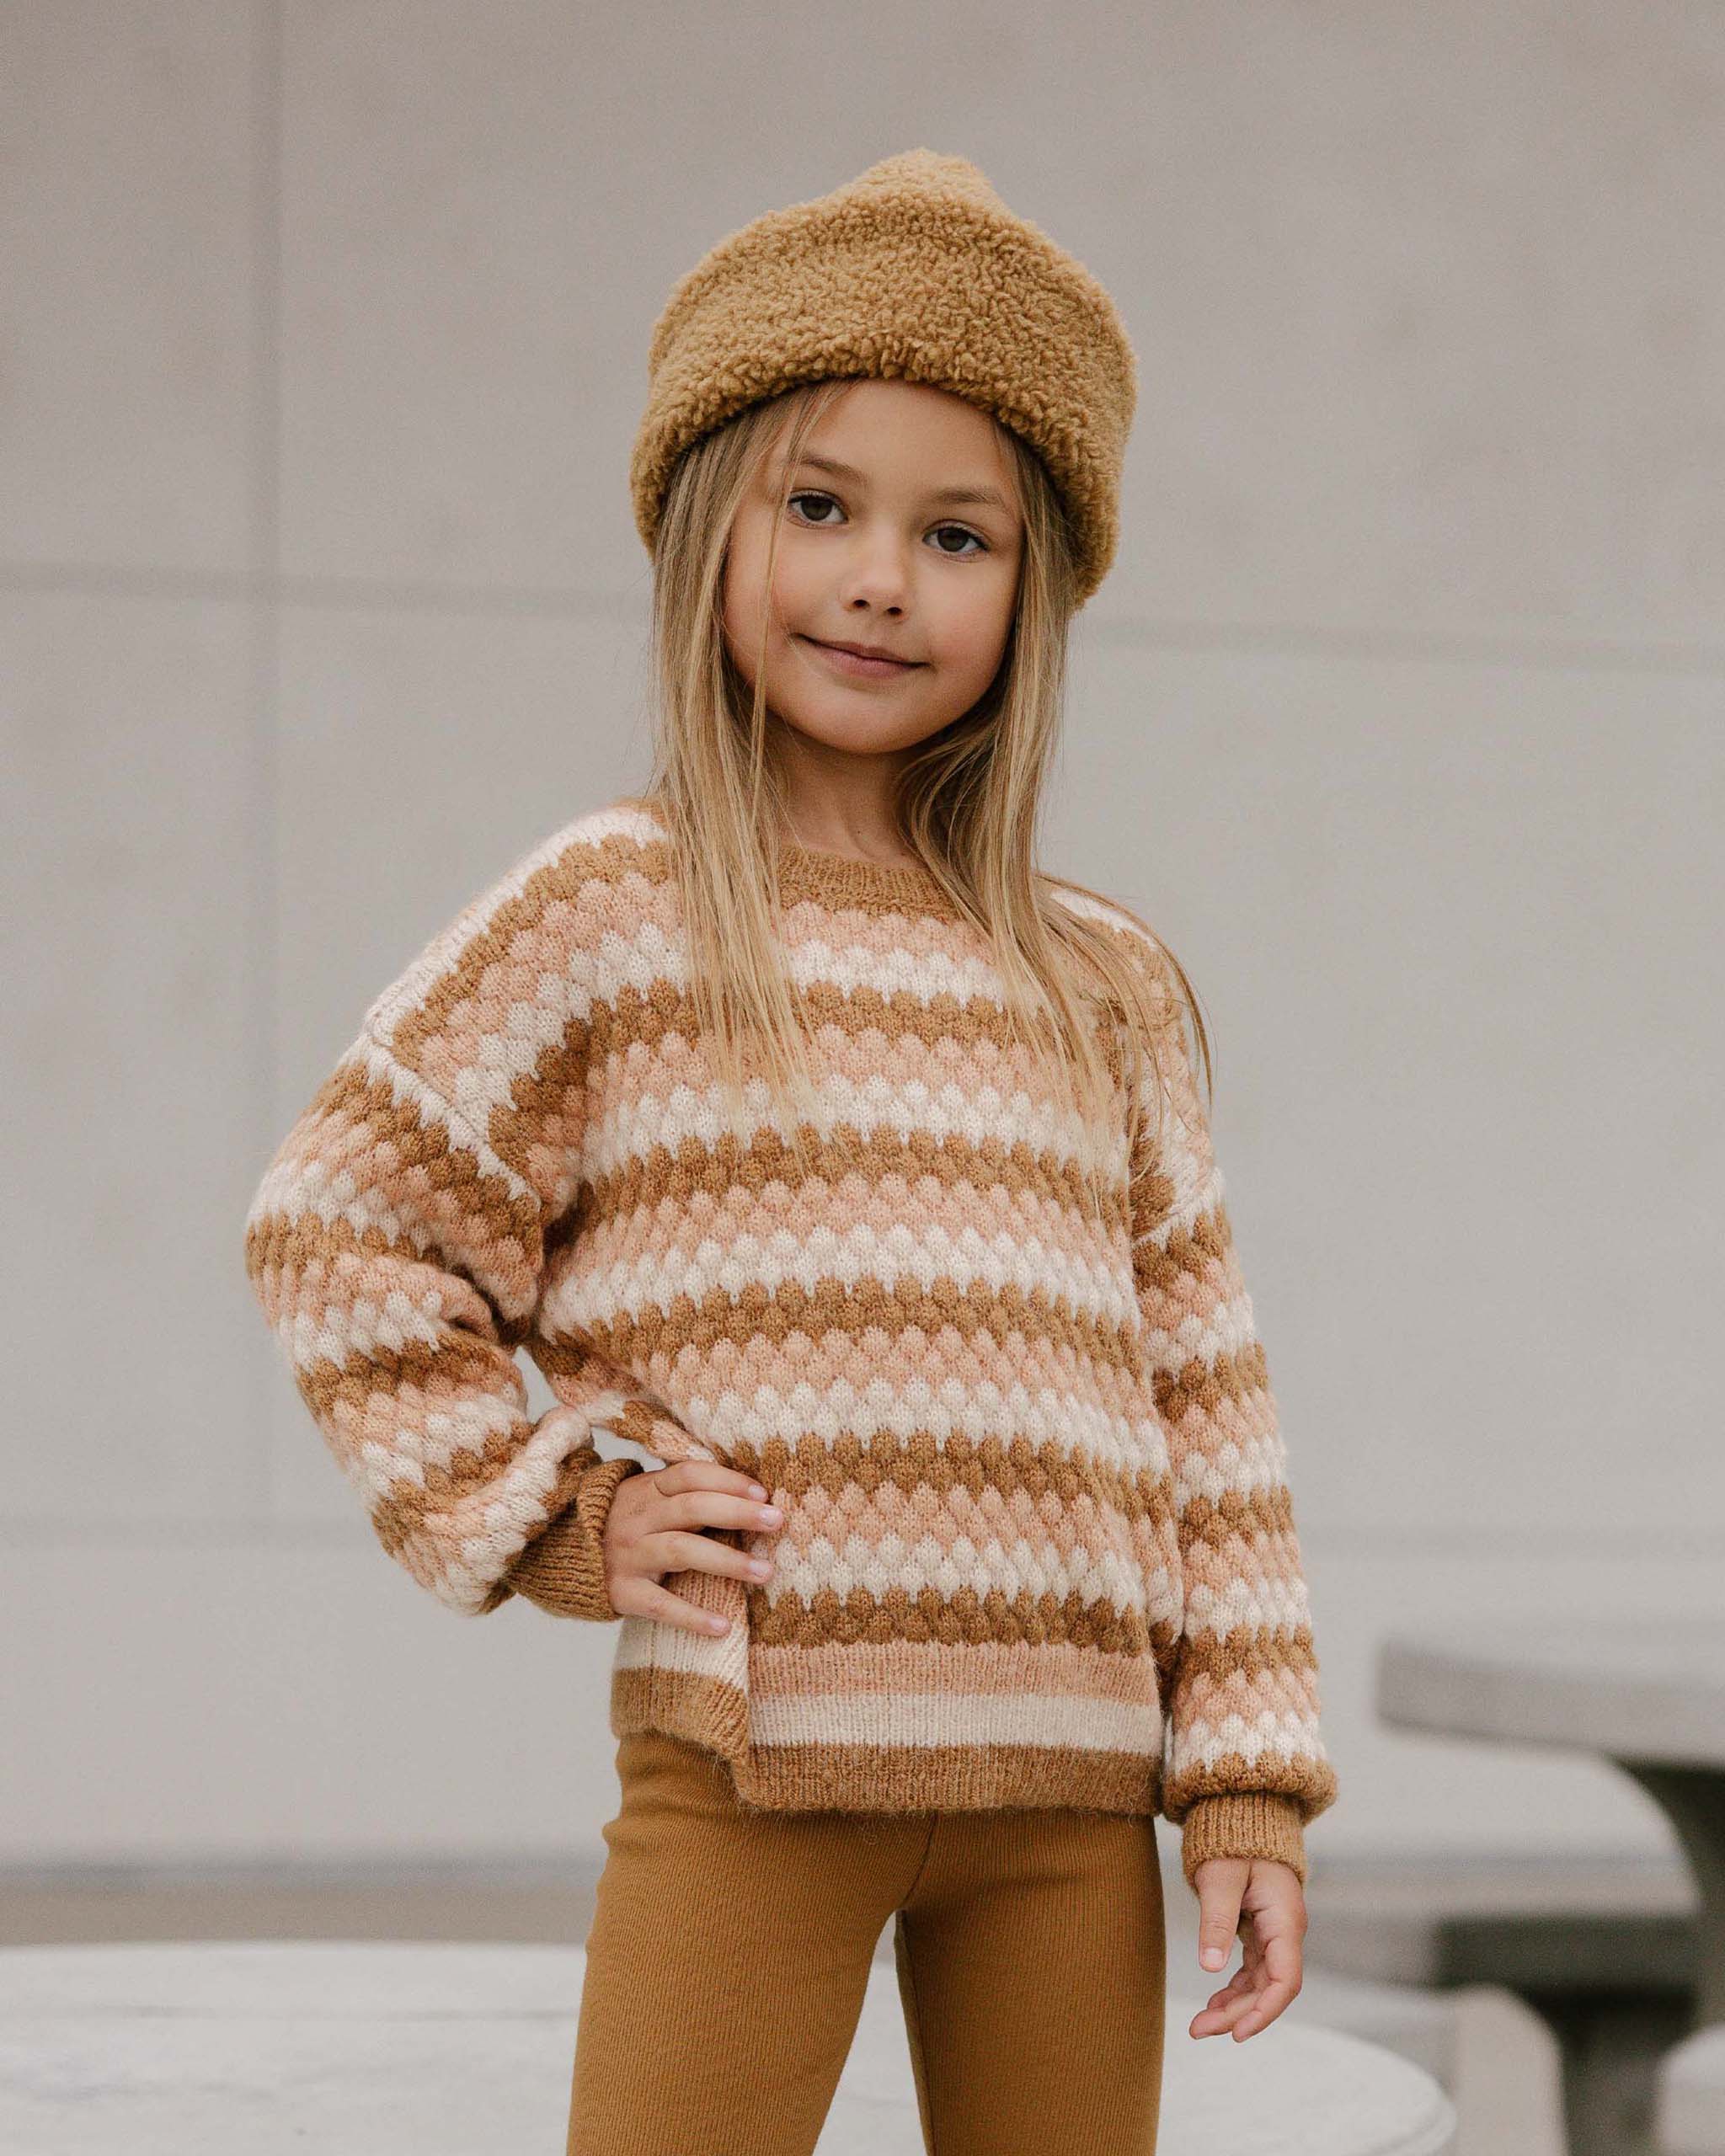 Aspen Sweater || Multi-Stripe - Rylee + Cru | Kids Clothes | Trendy Baby Clothes | Modern Infant Outfits |